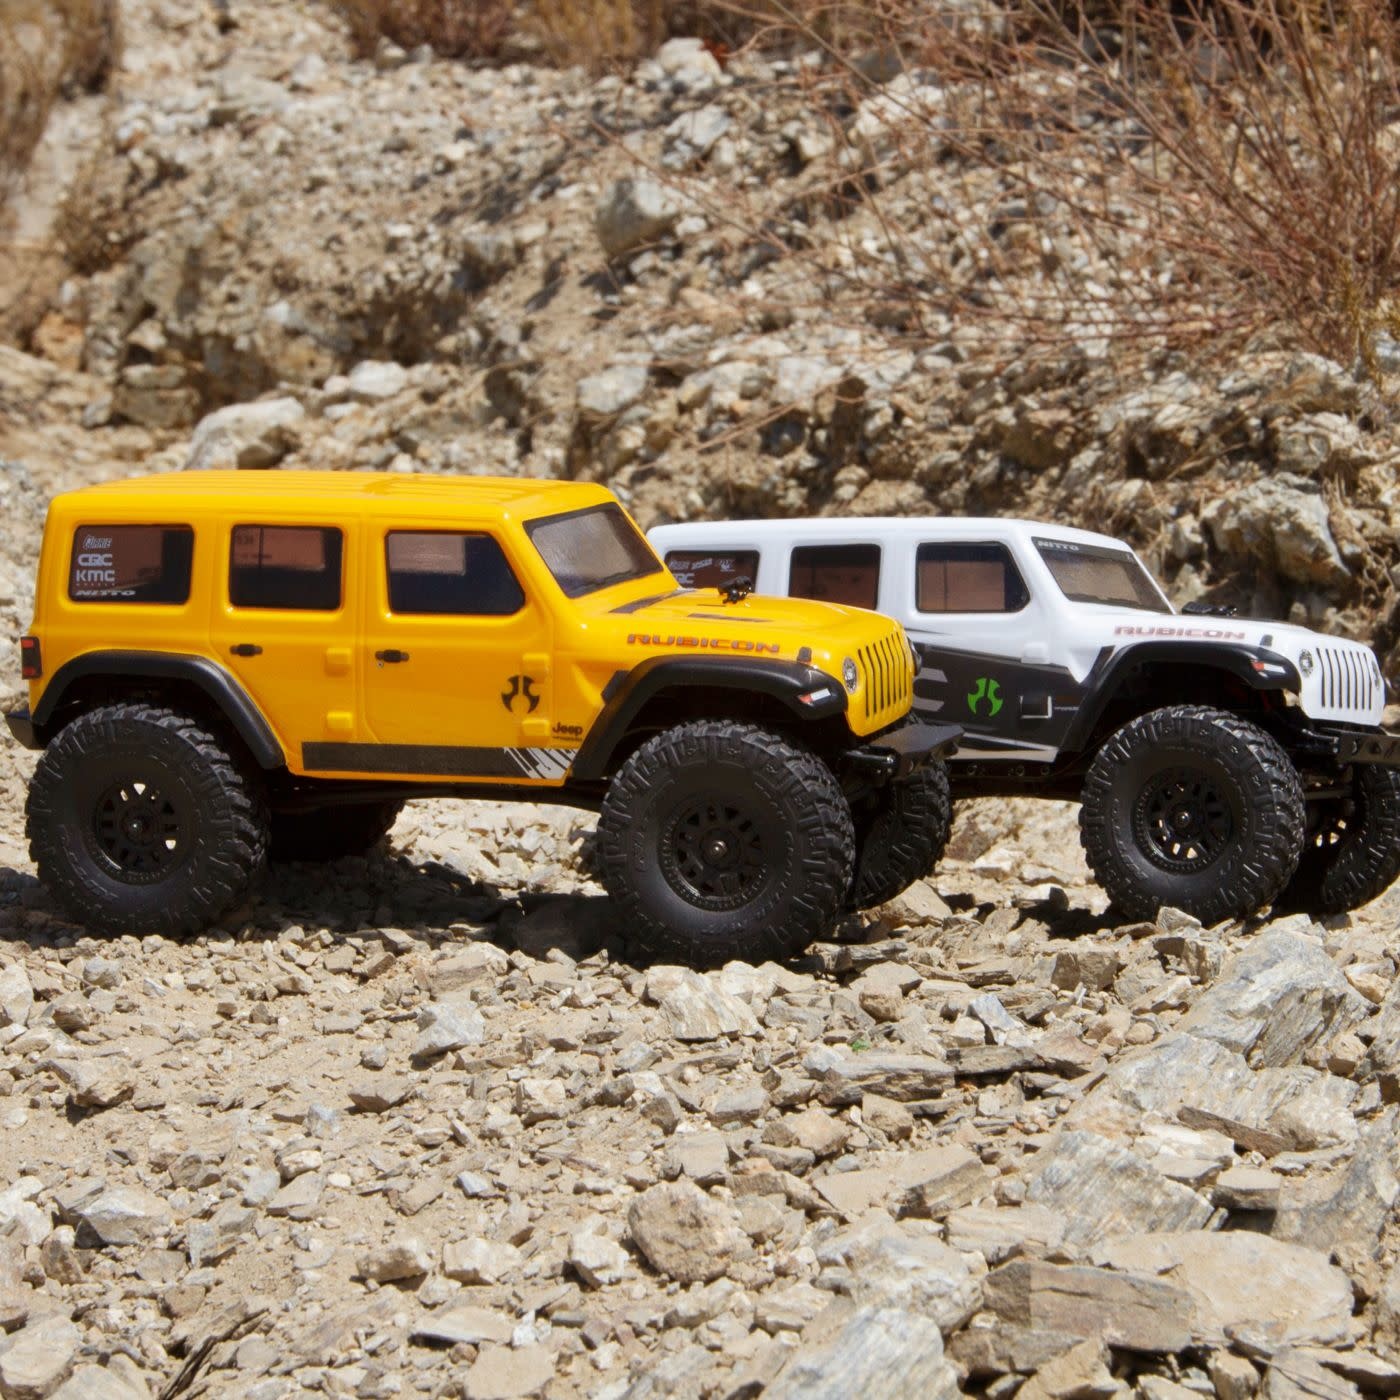 Axial AXI00002T2 SCX24 Electric RC 2019 Jeep Wrangler JLU CRC 1/24 4WD RTR Yellow